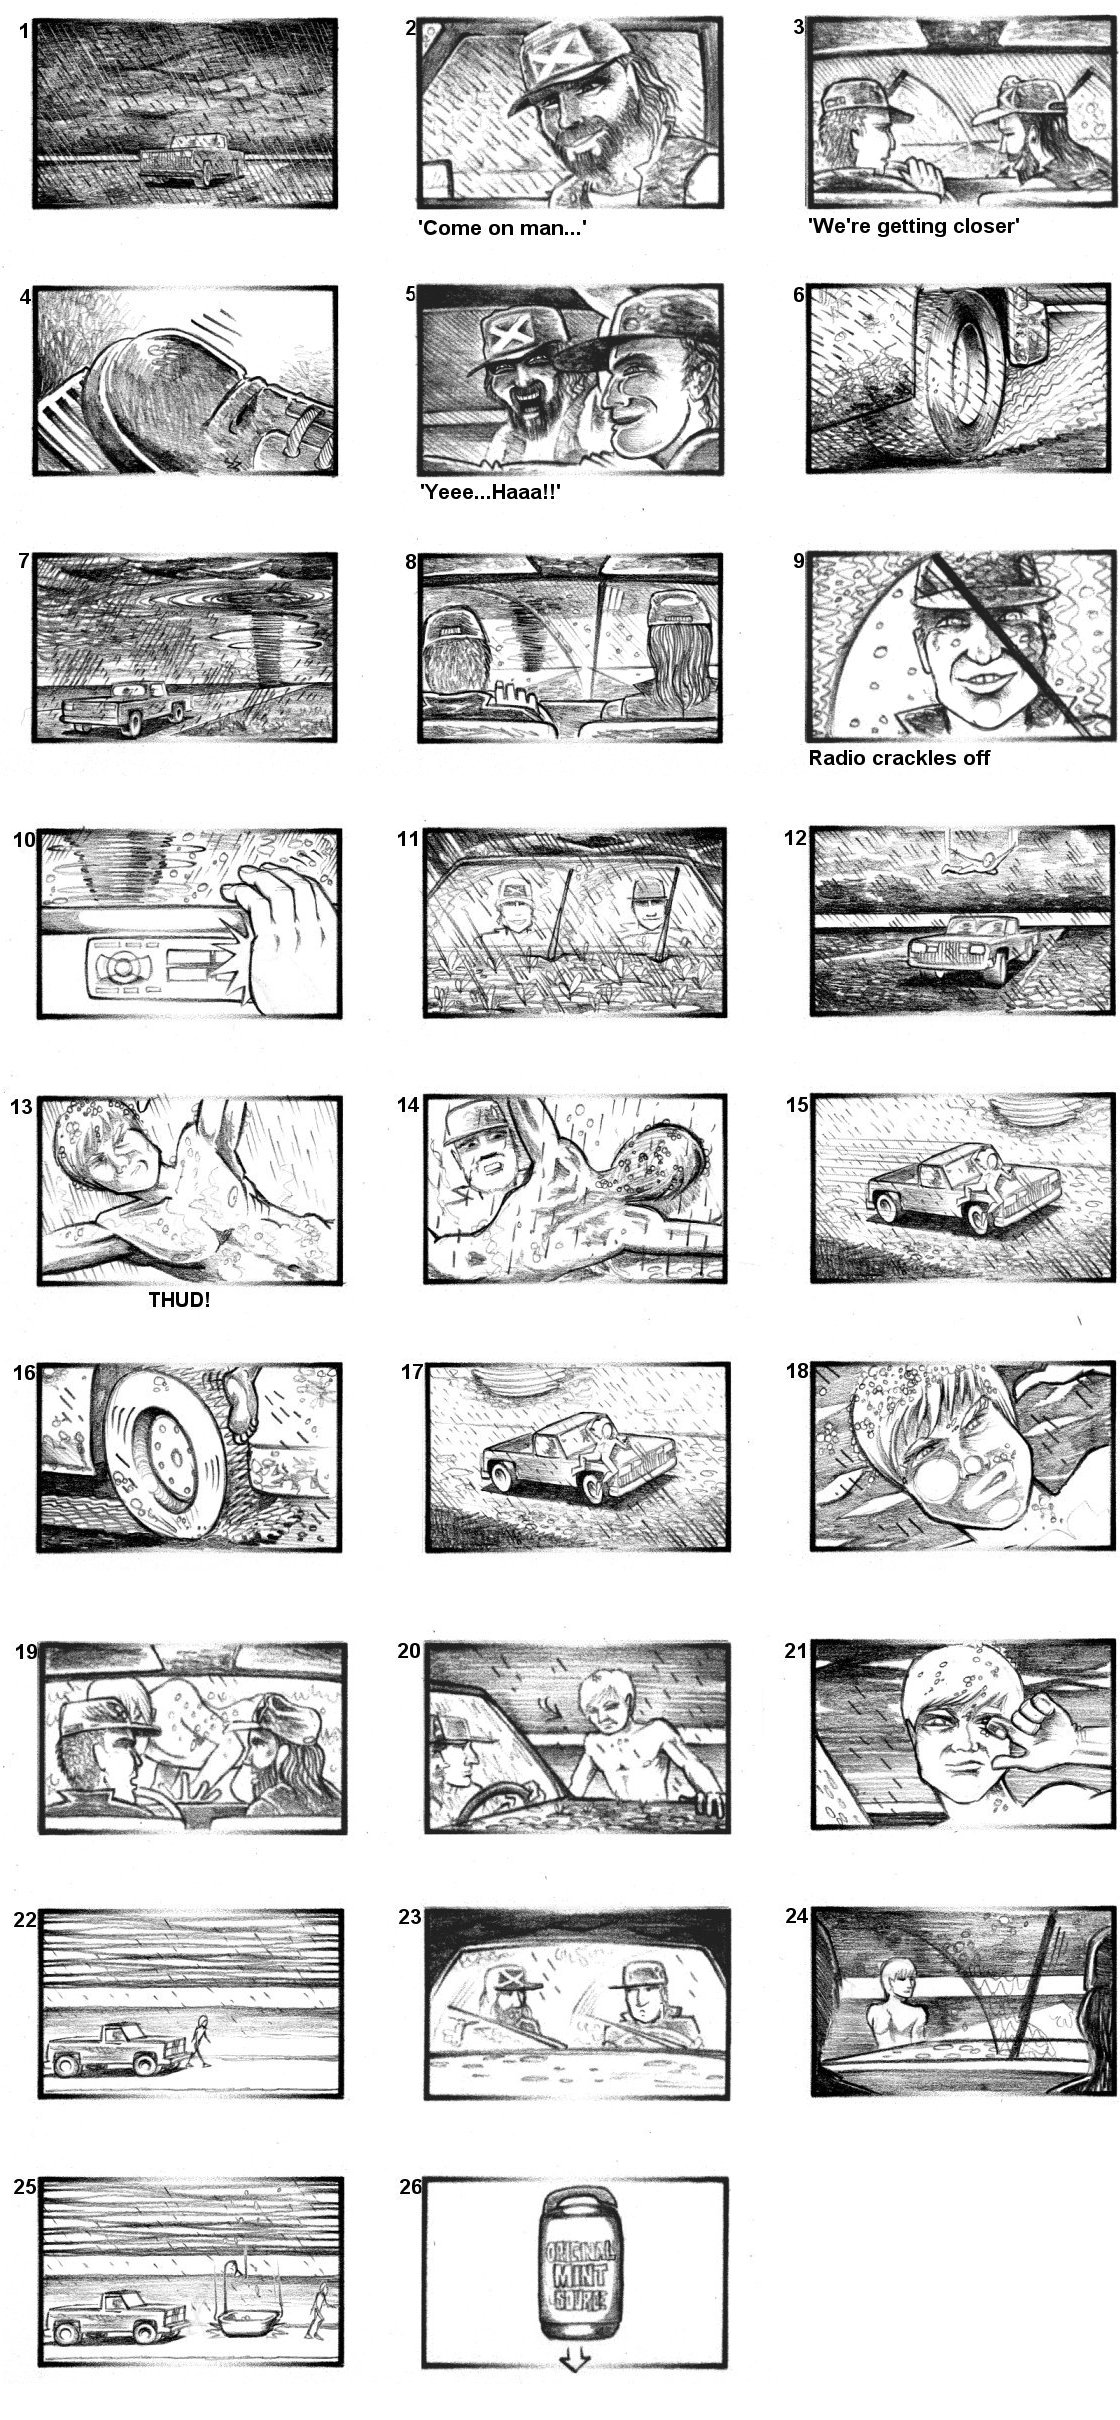 CUSSON'S MINT SOURCE STORYBOARDS BY ANDY SPARROW